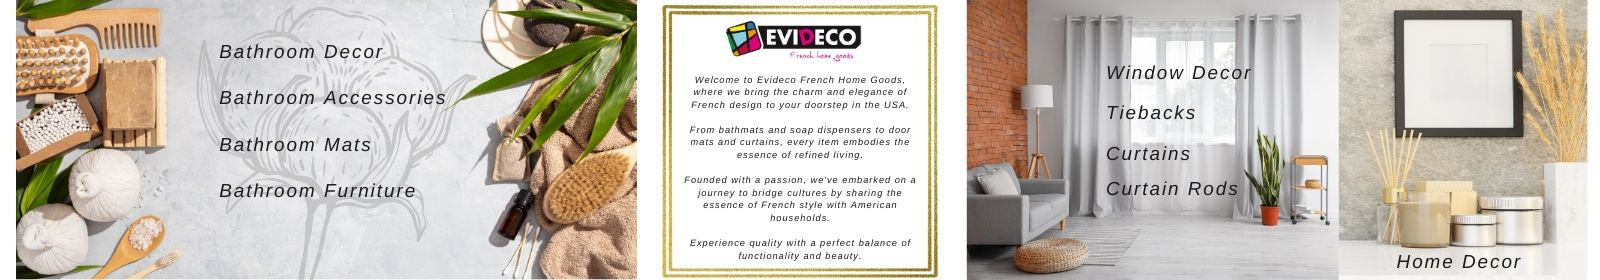 evideco french home goods from bathroom accessories, bathroom furniture, doormats, window treatments